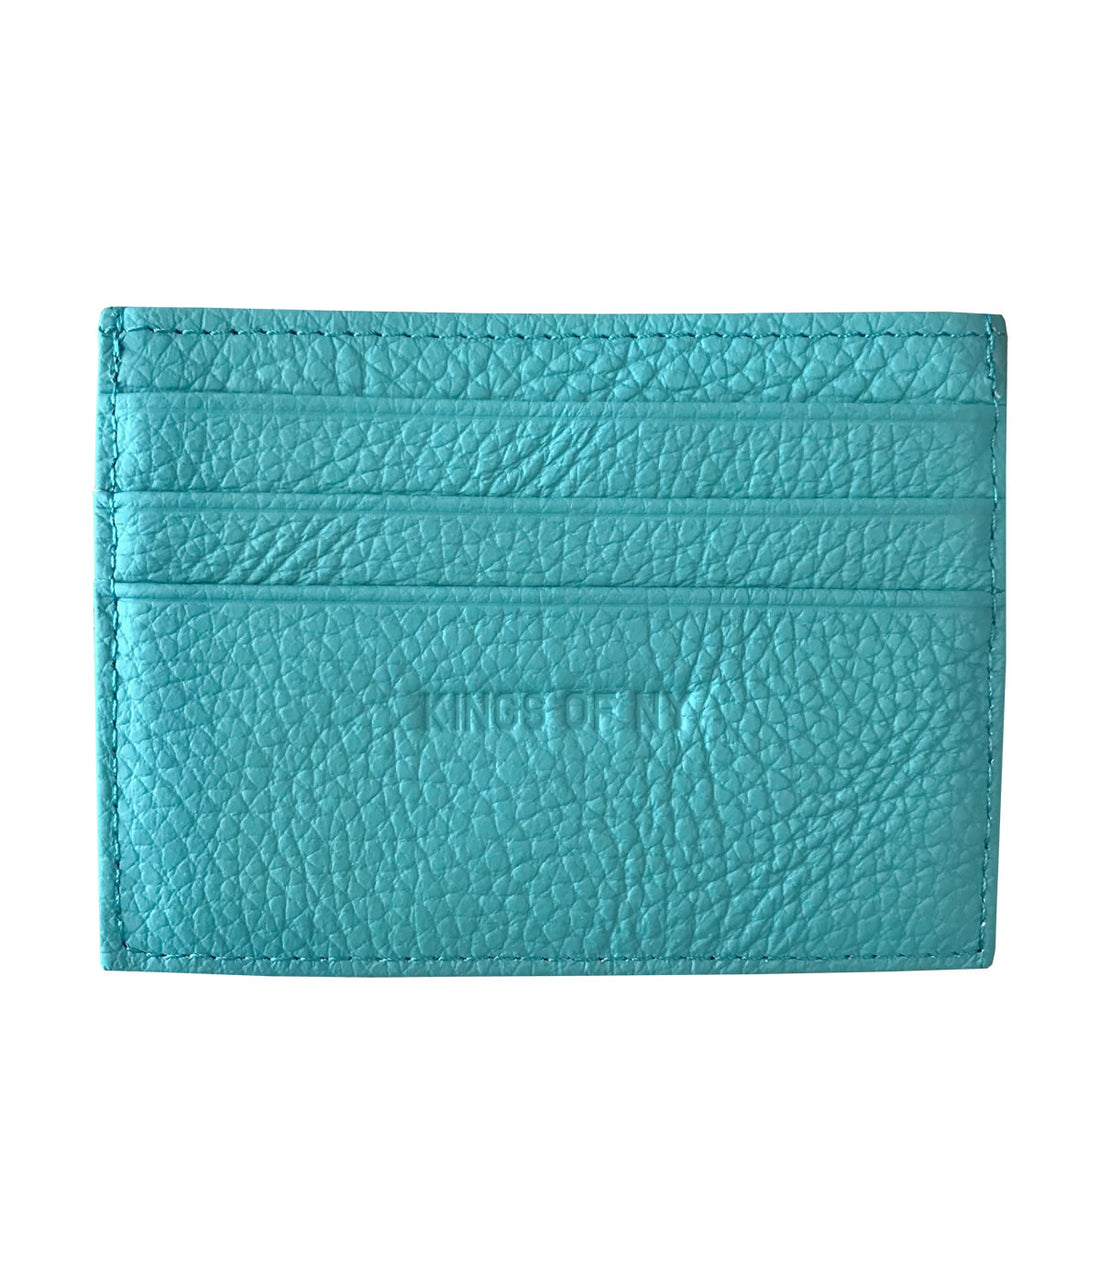 Kings Of NY Pebble Leather Card Holder Wallet Teal